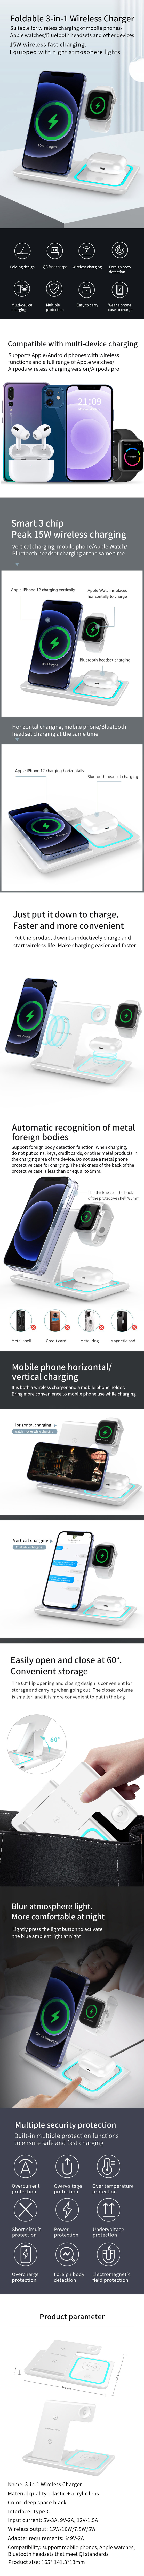 3 in 1 Wireless Charger: 15W Charging Station Dock for Airpods Pro, Apple Watch, and iPhone